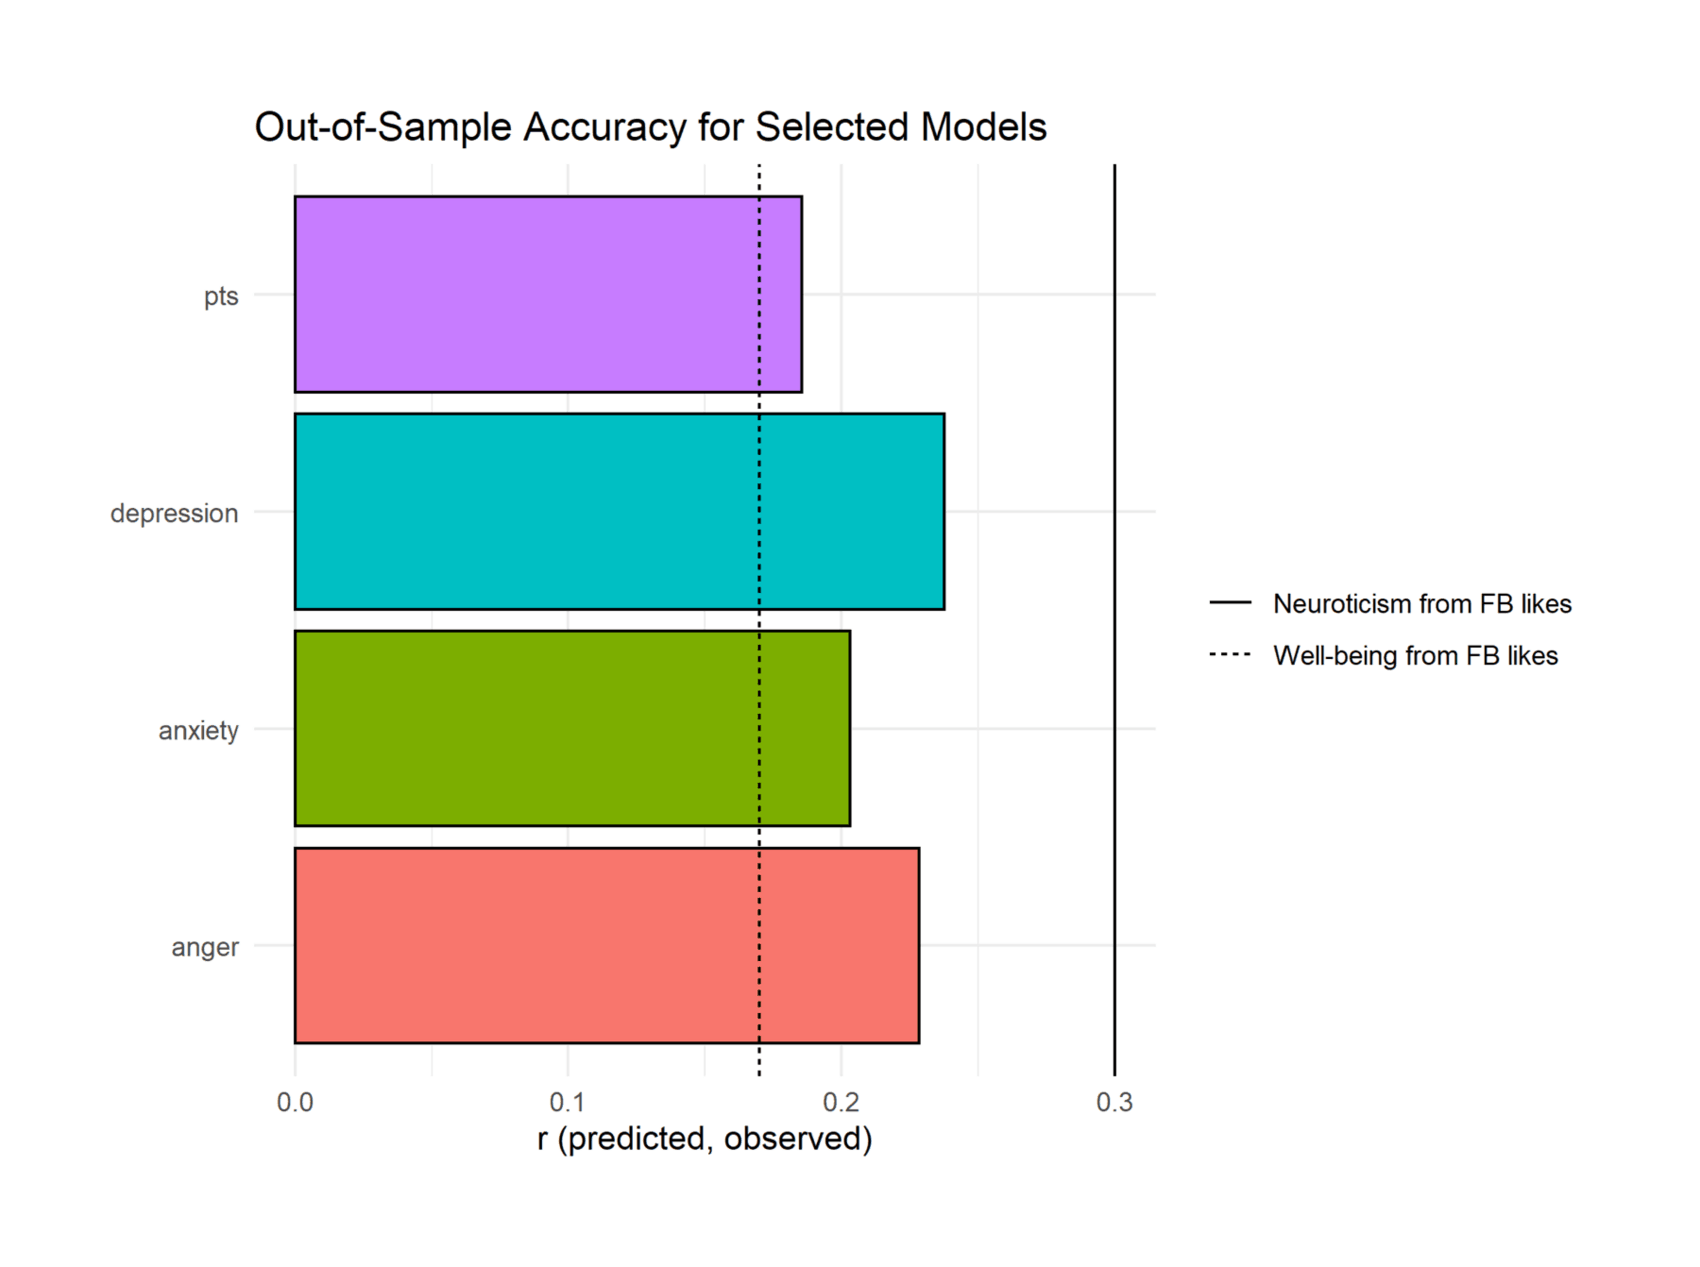 Figure 6: Out-of-Sample Accuracy for Selected Models